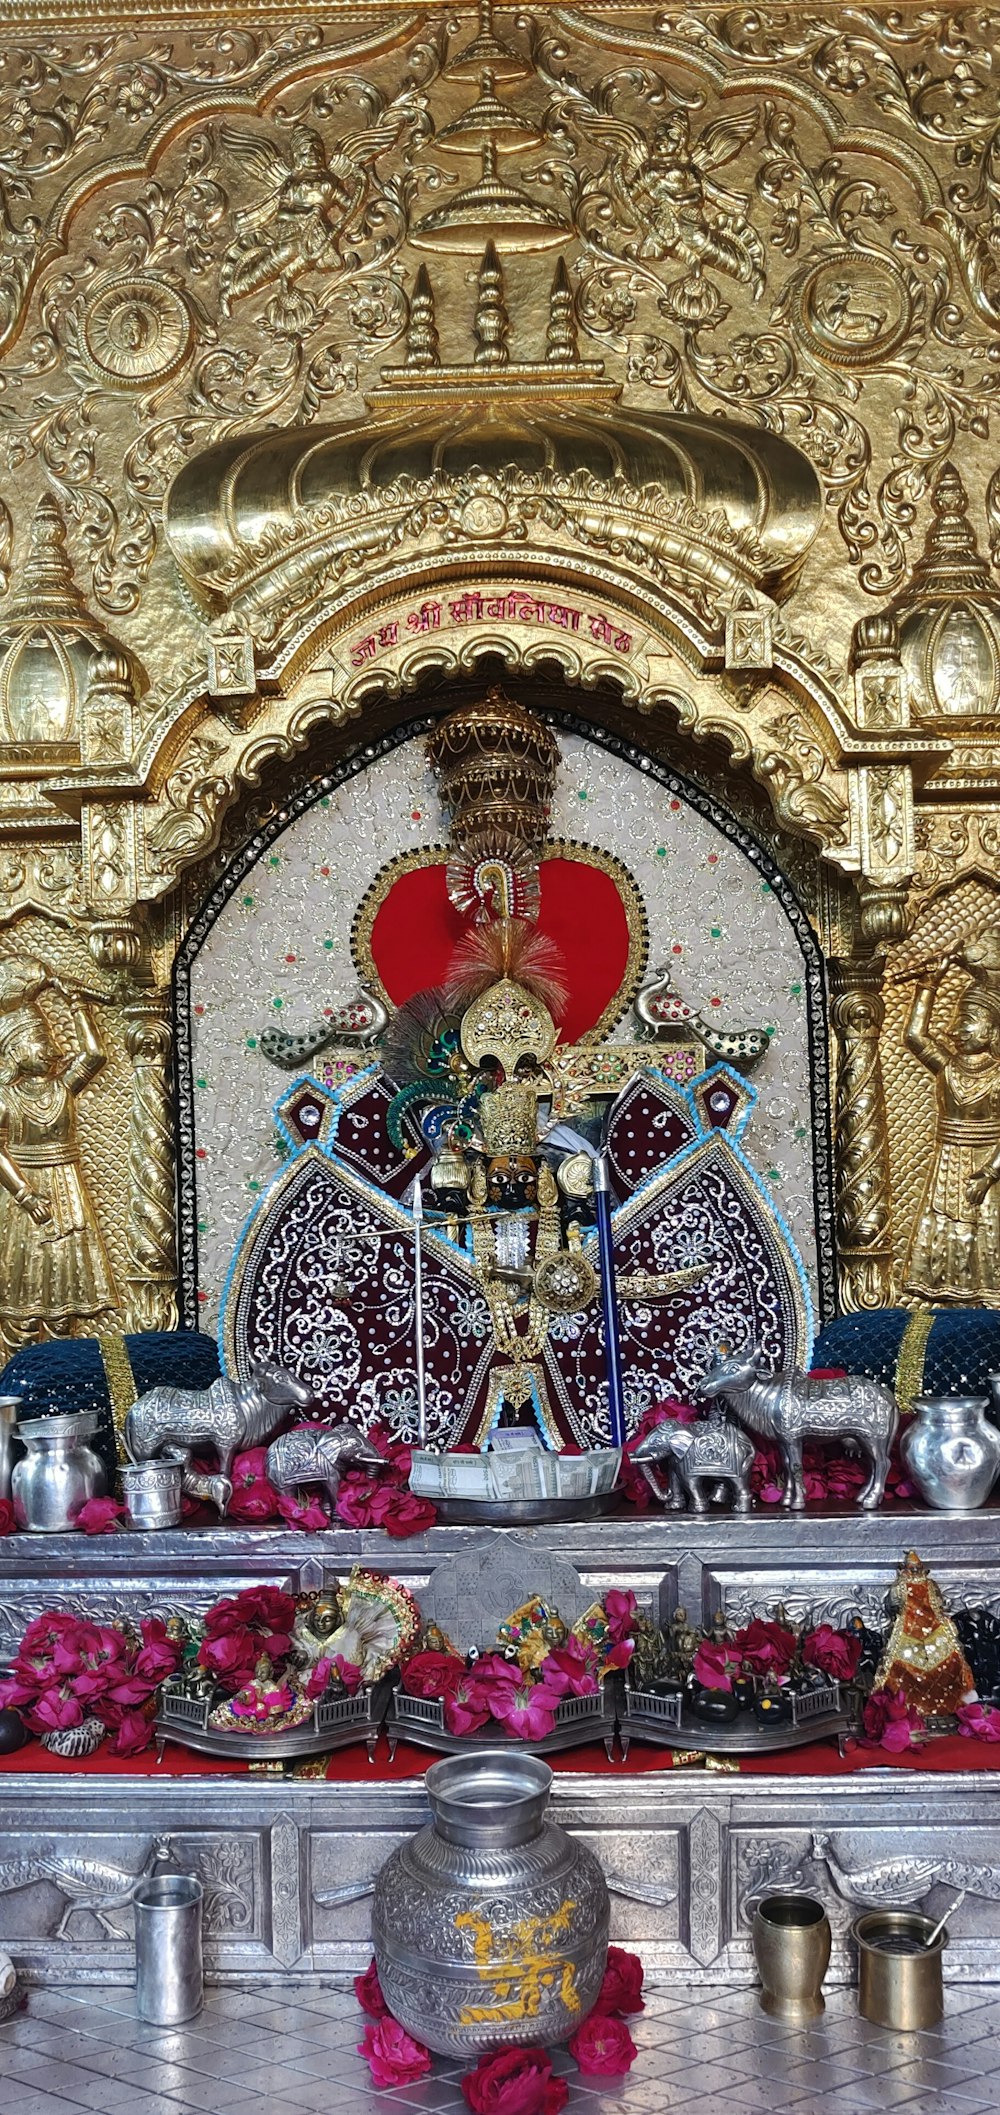 a shrine with a gold and red decoration